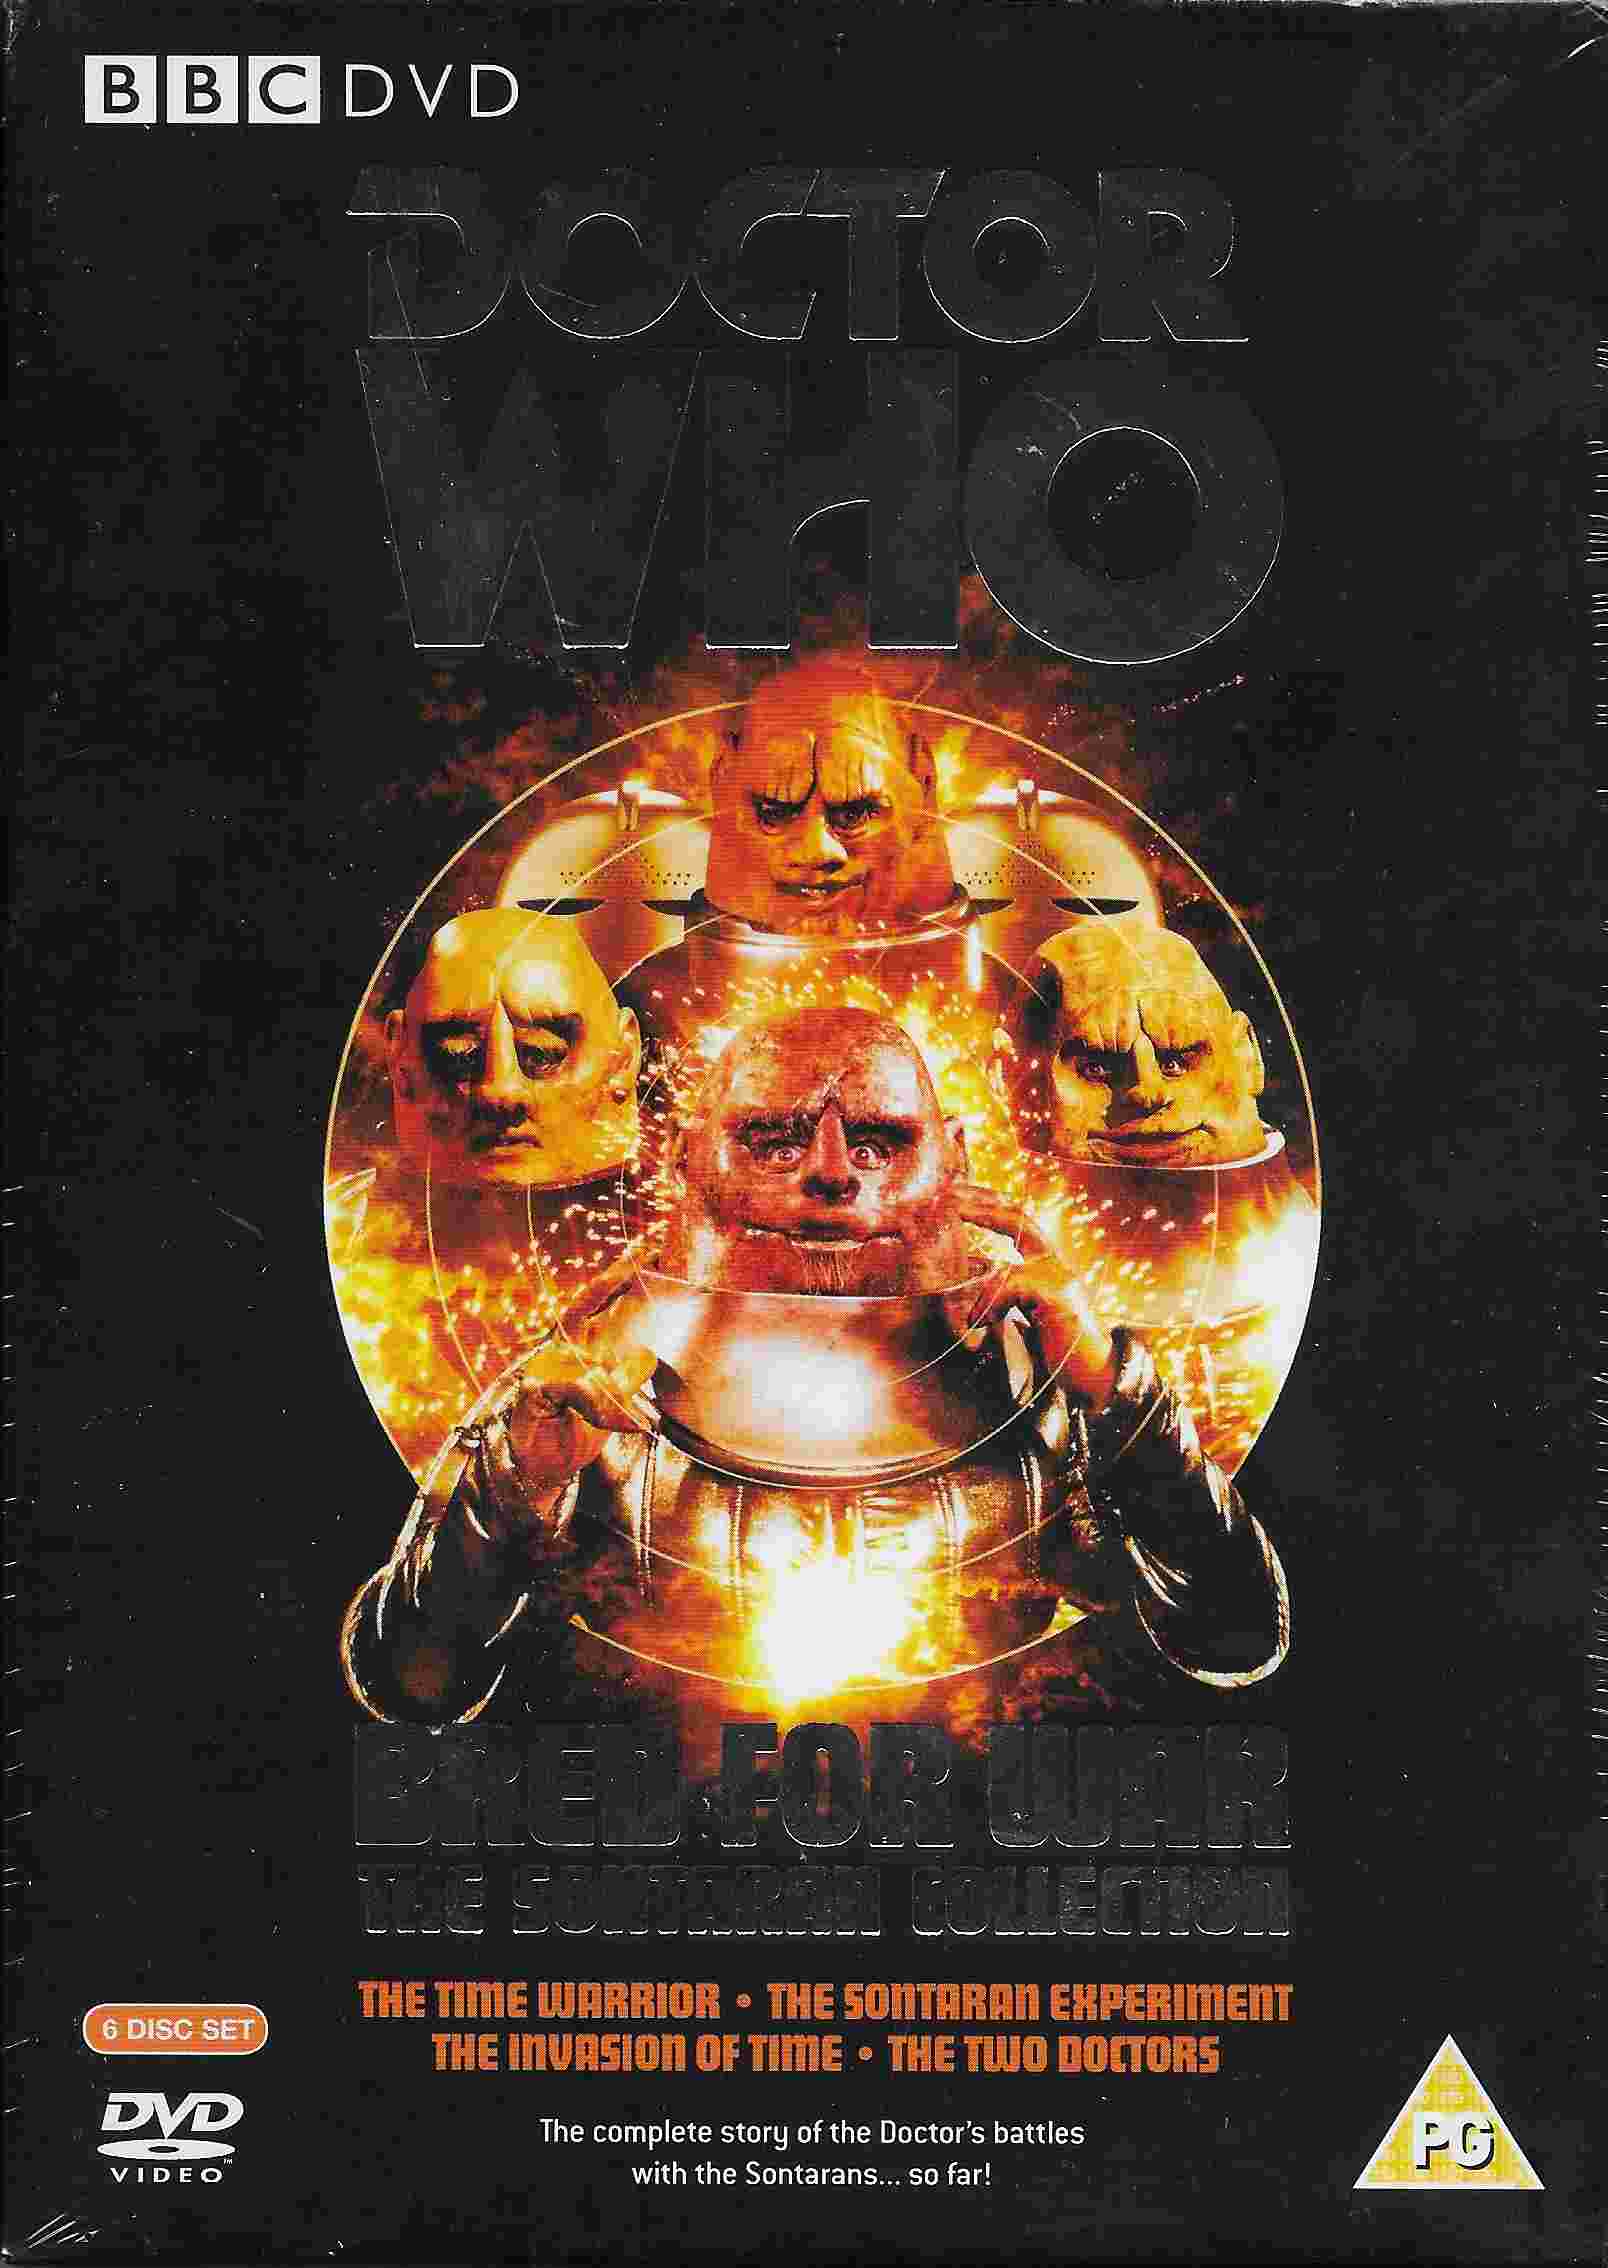 Picture of BBCDVD 2617 Doctor Who - Bred for war the Sontaran collection by artist Various from the BBC dvds - Records and Tapes library